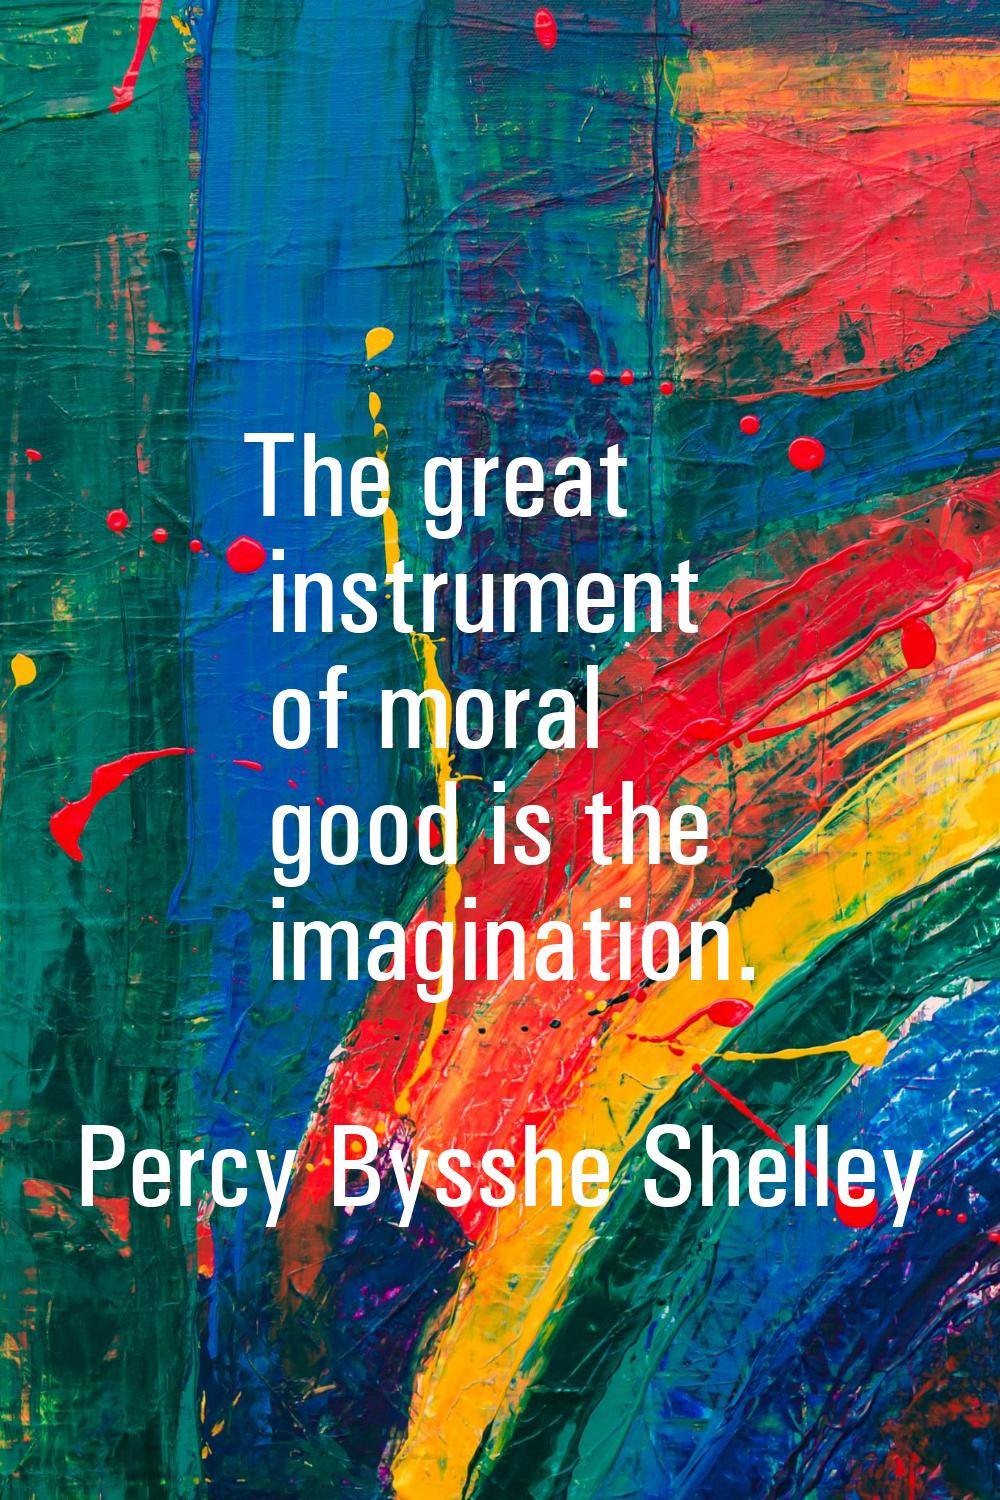 The great instrument of moral good is the imagination.